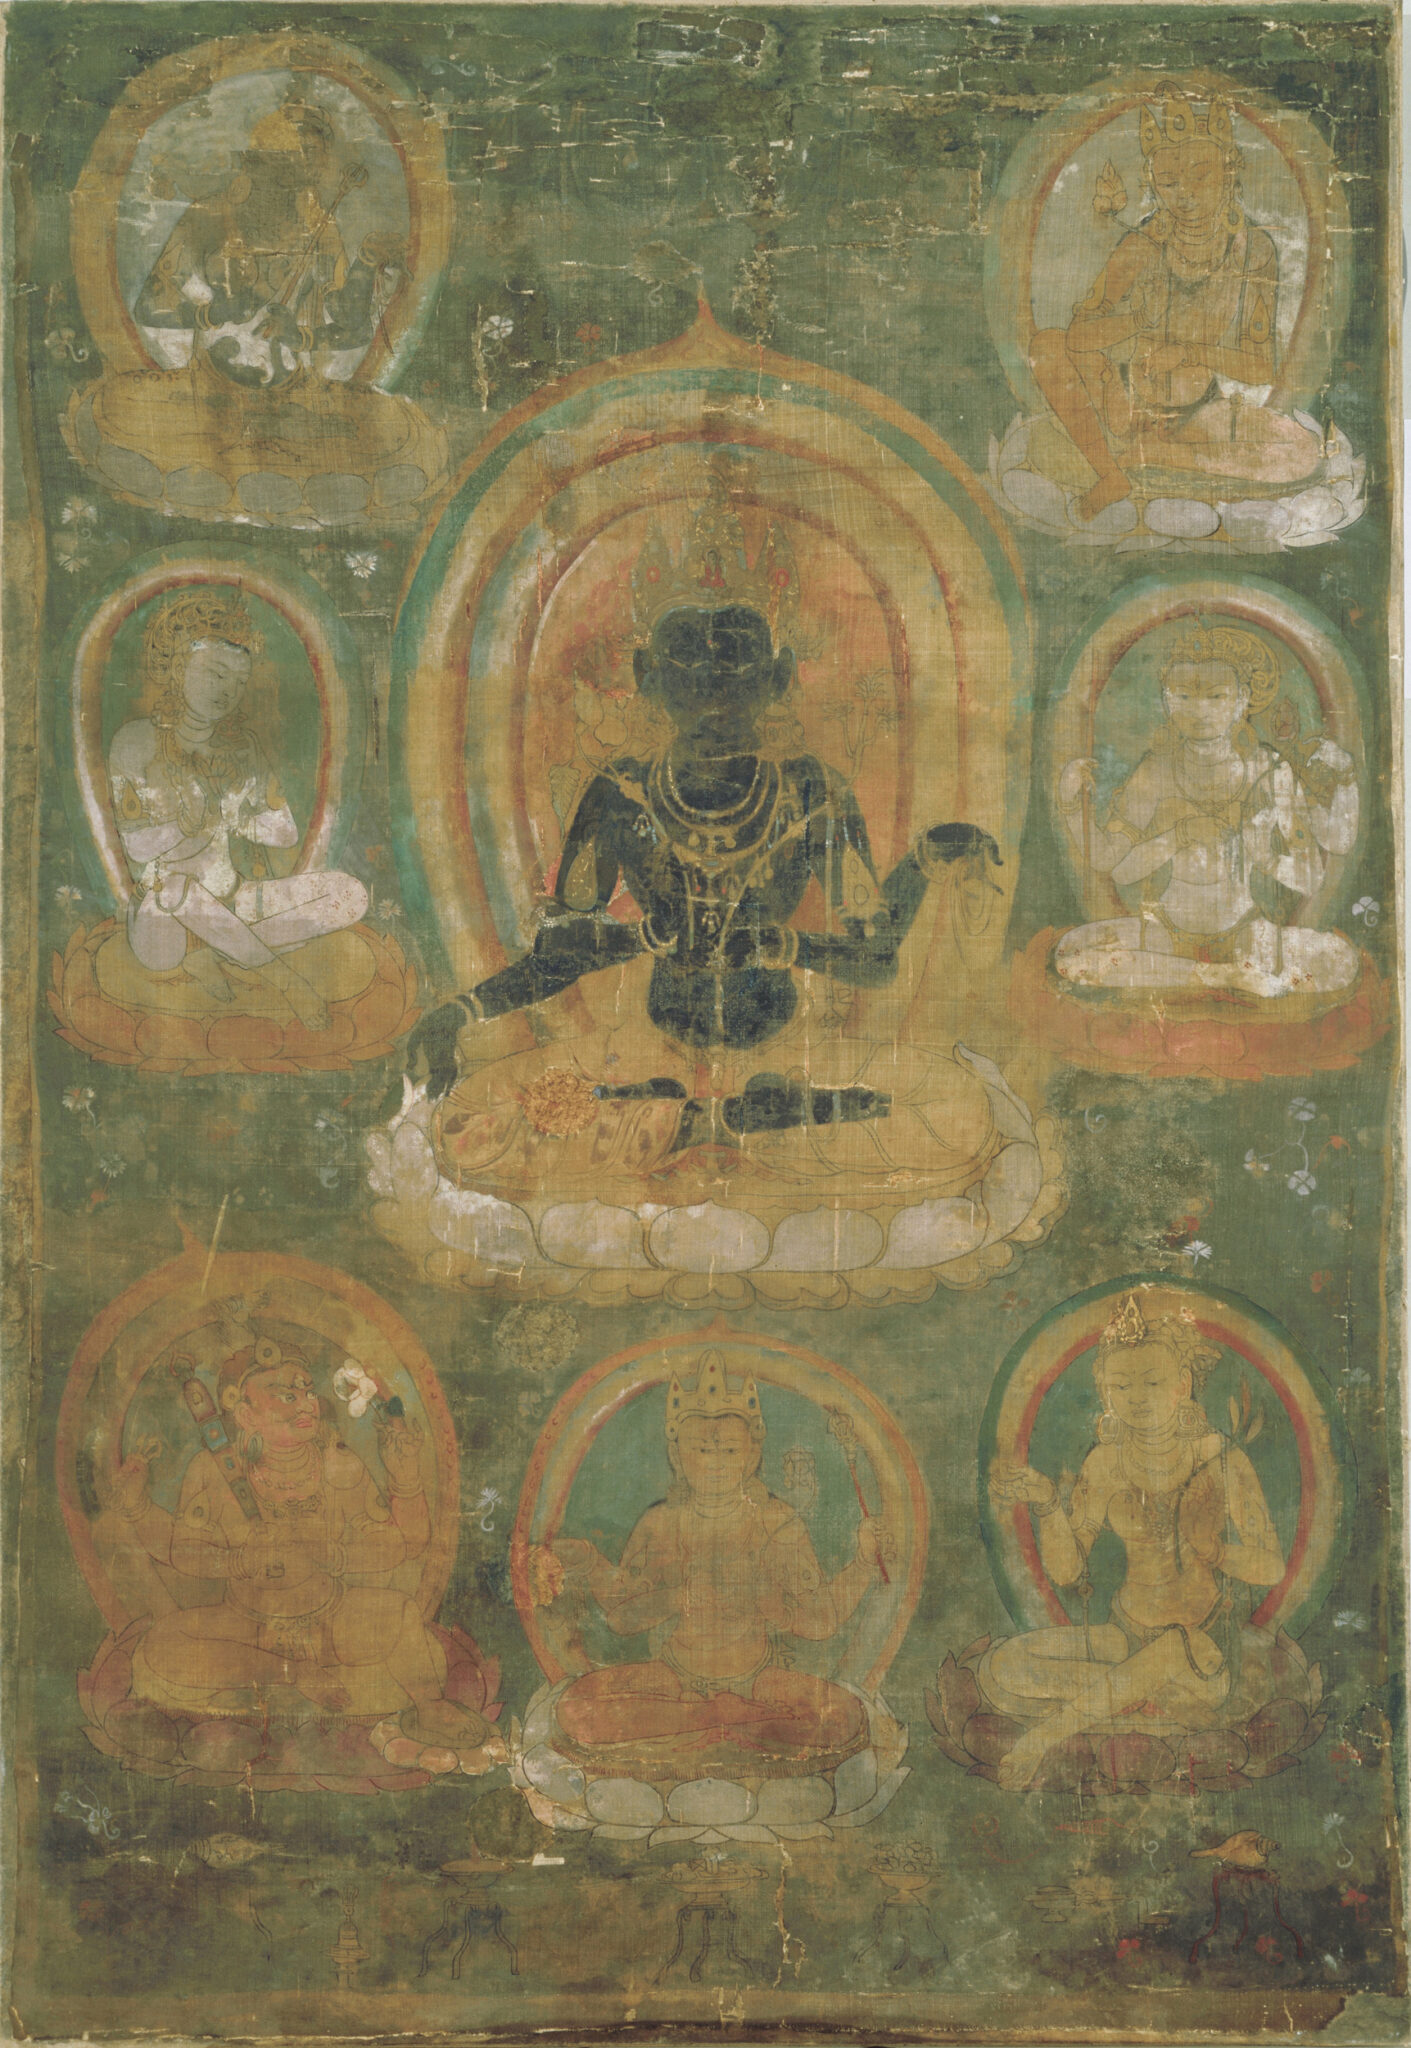 Deity with dark skin seated on lotus pedestal surrounded by seven smaller deities against green background